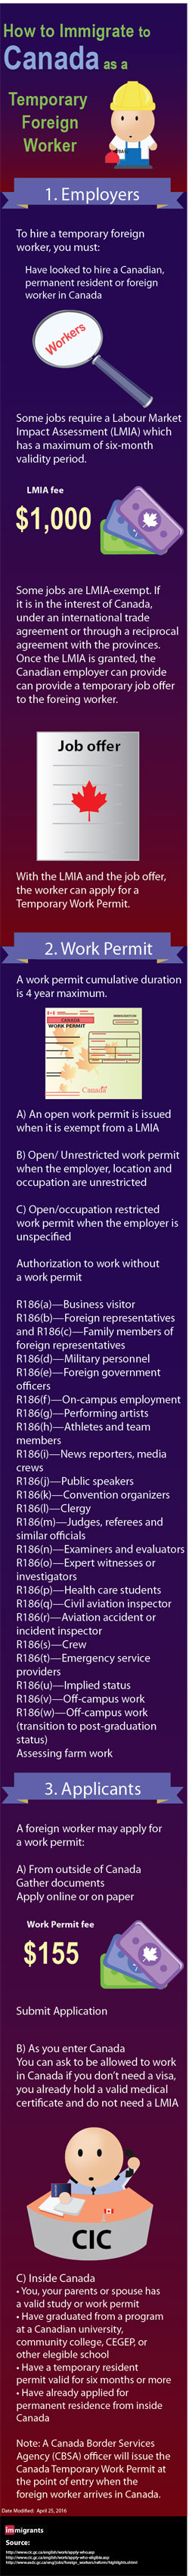 Temporary Foreign Workers Infographic